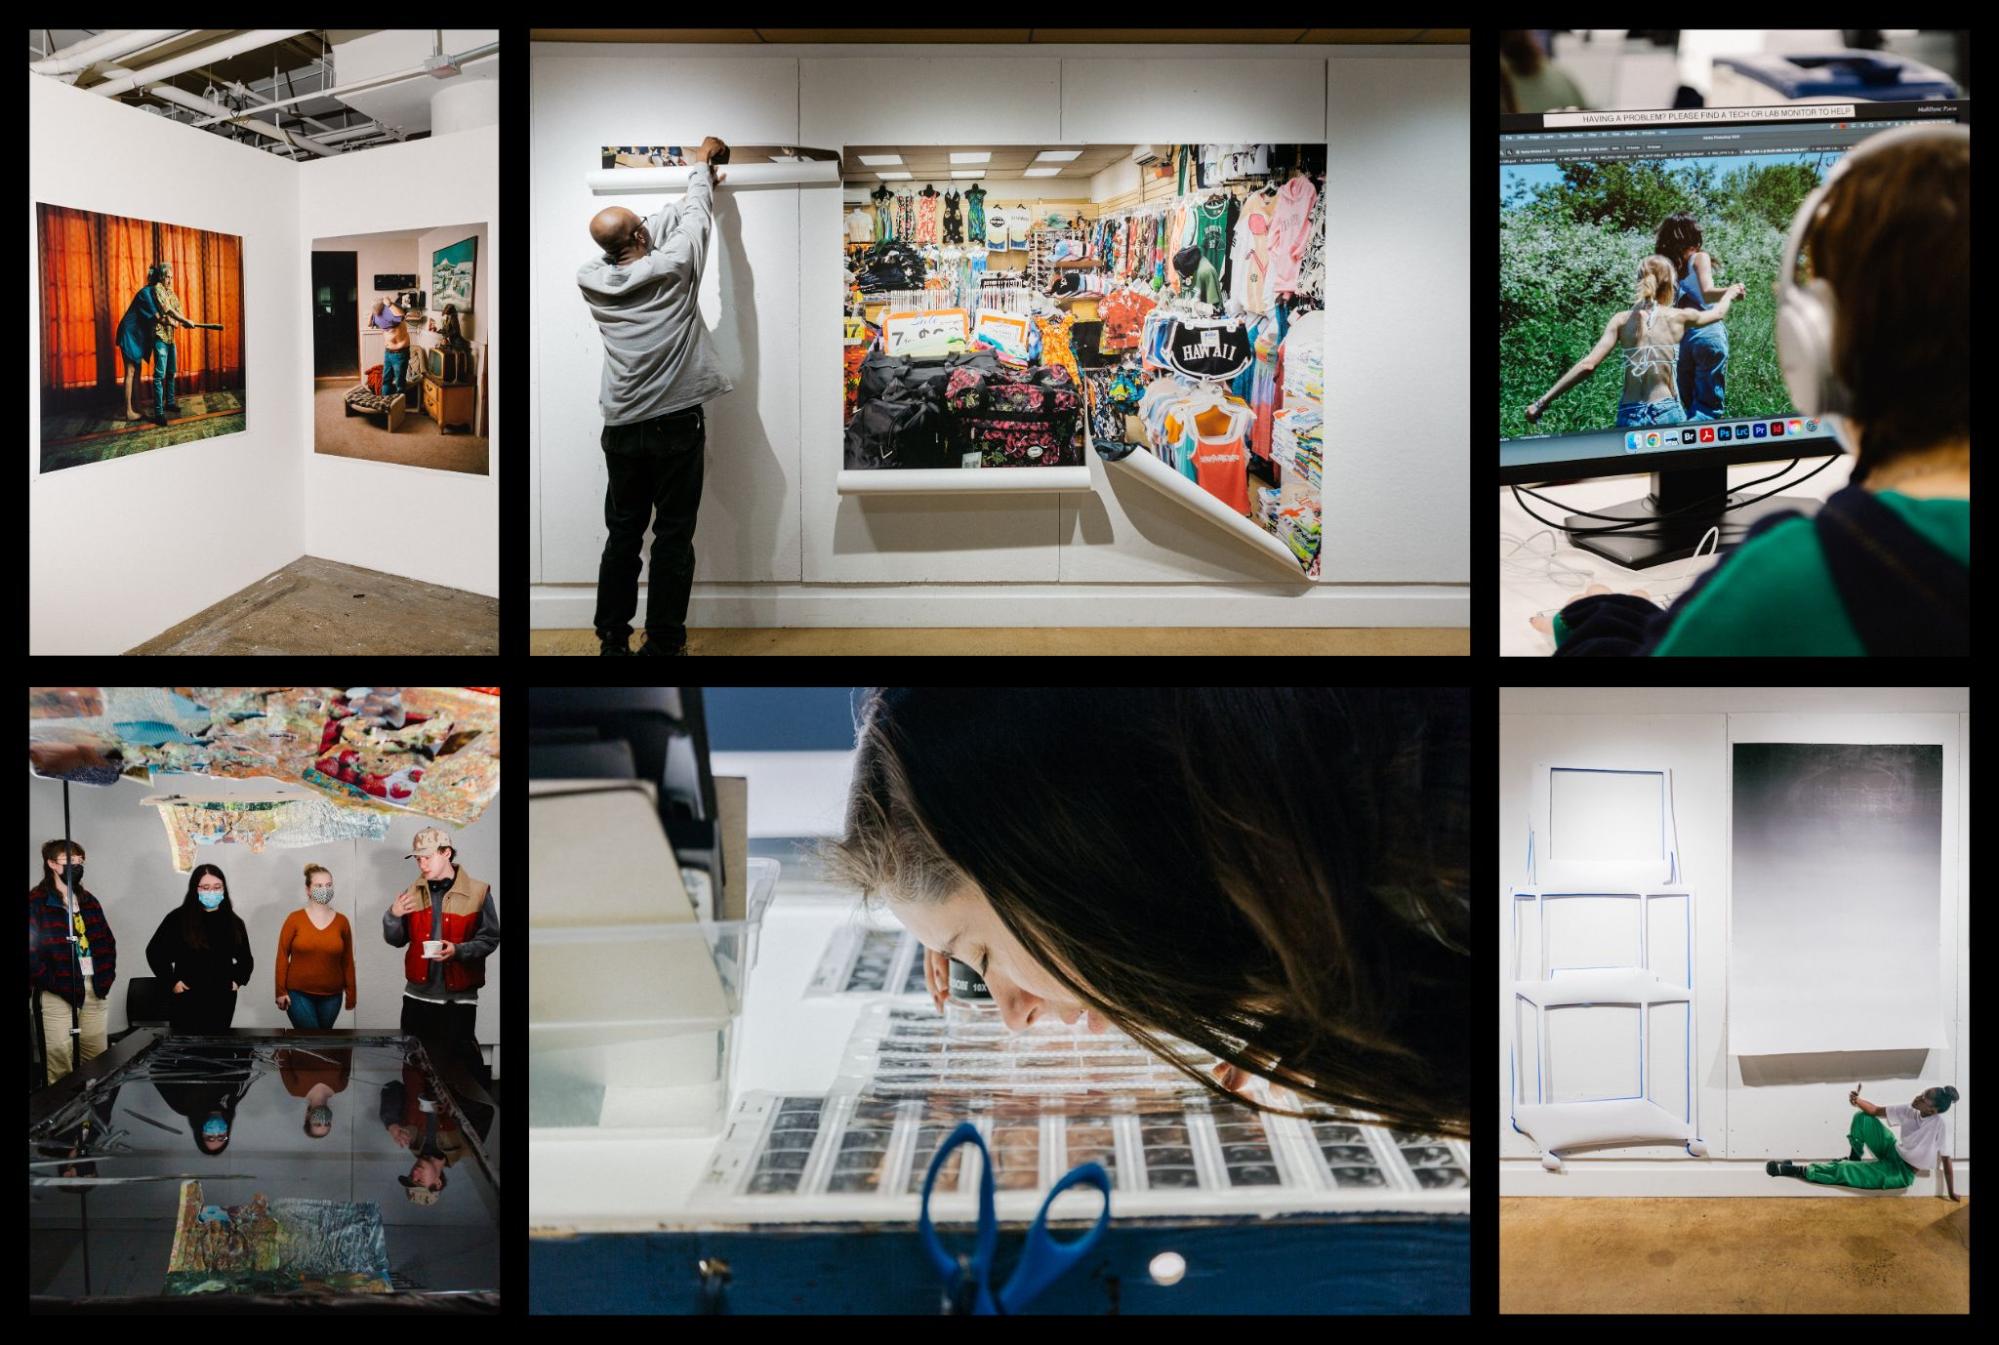 a grid of six photos, top row pictures include a view of a gallery with two paintings, a teacher hanging a piece, and a student looking at visual media on a desktop computer. The second row in the grid has a photo of 4 students presenting works, a student admiring works, and two pieces of art, one of a tv stand and one on print of a gradient with a student in the foreground taking a picture with their phone